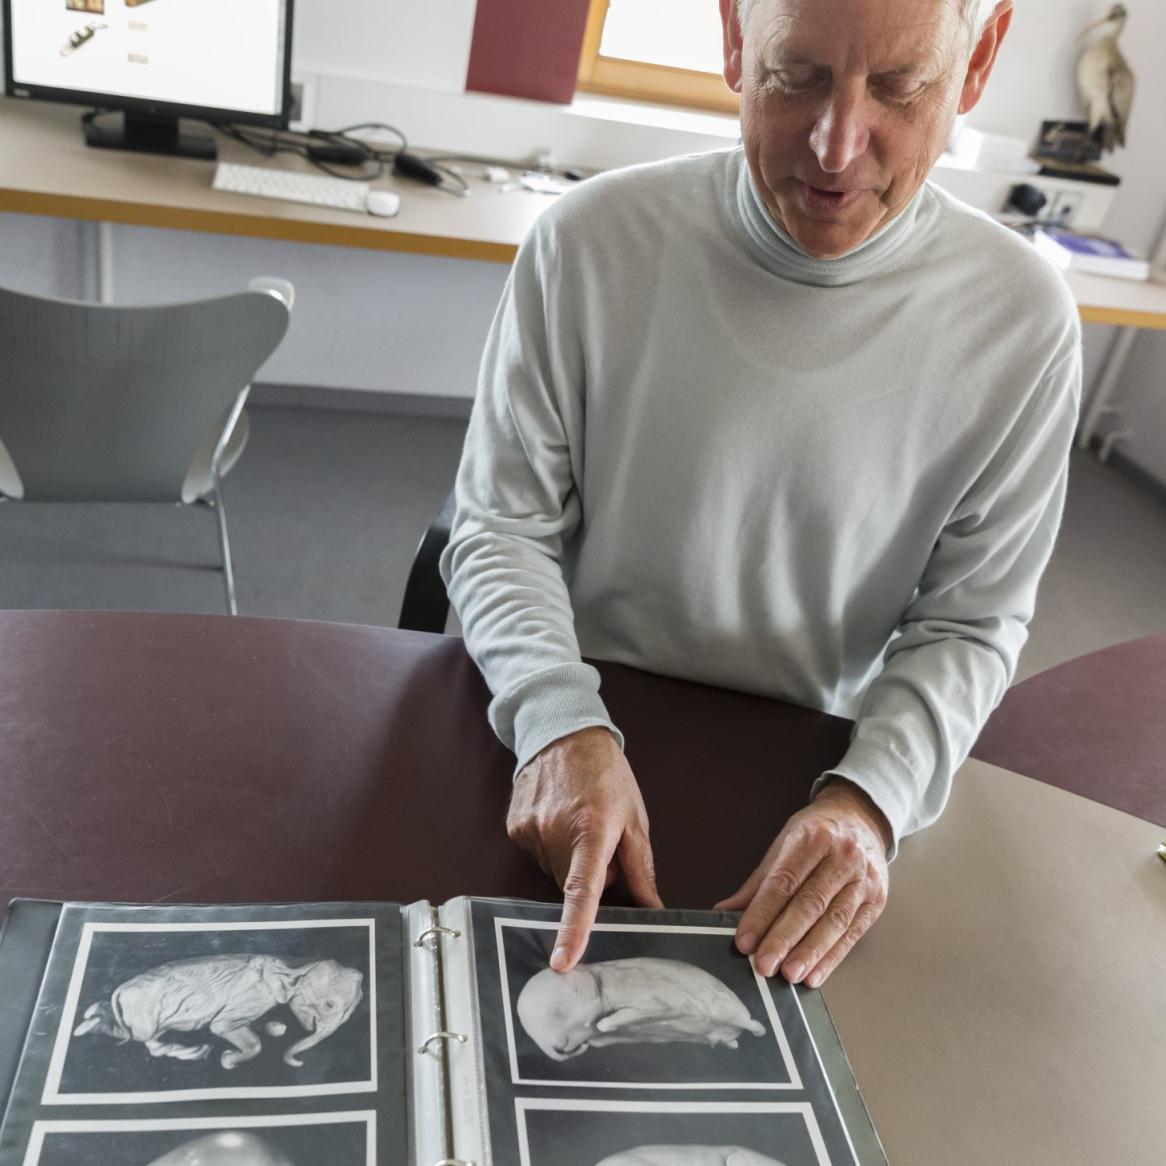 Prof. Fischer is showing CT scans of the elephant embryos